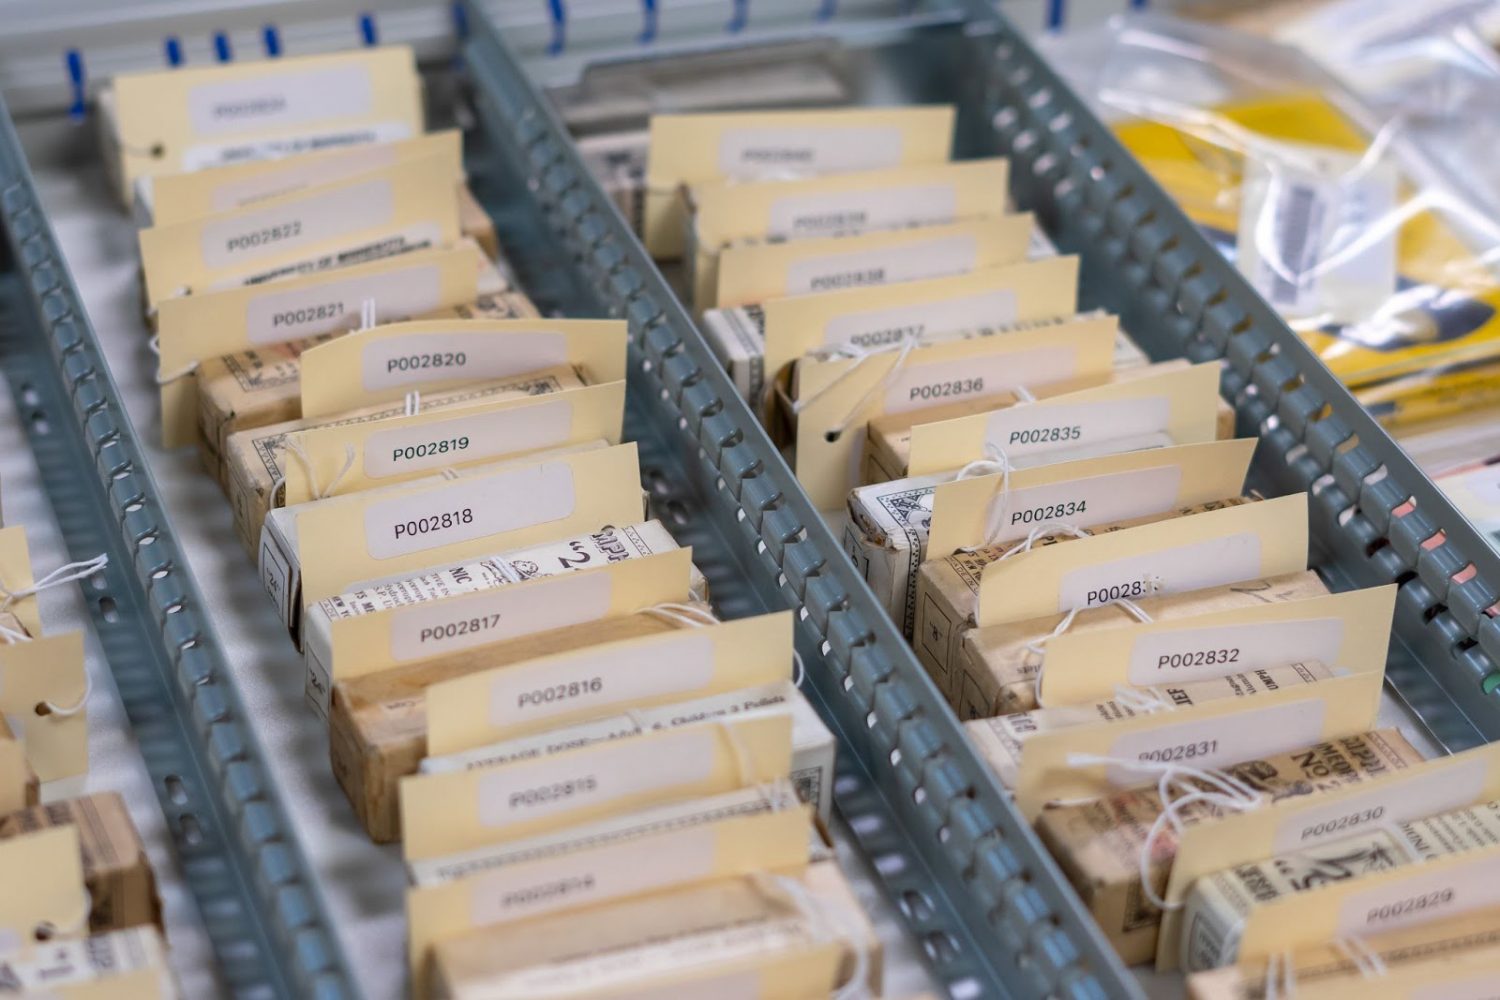 Conservation specialist Anna Shepherd is wearing a mask and gloves as she matches up pharmaceutical boxes with their corresponding bar codes.